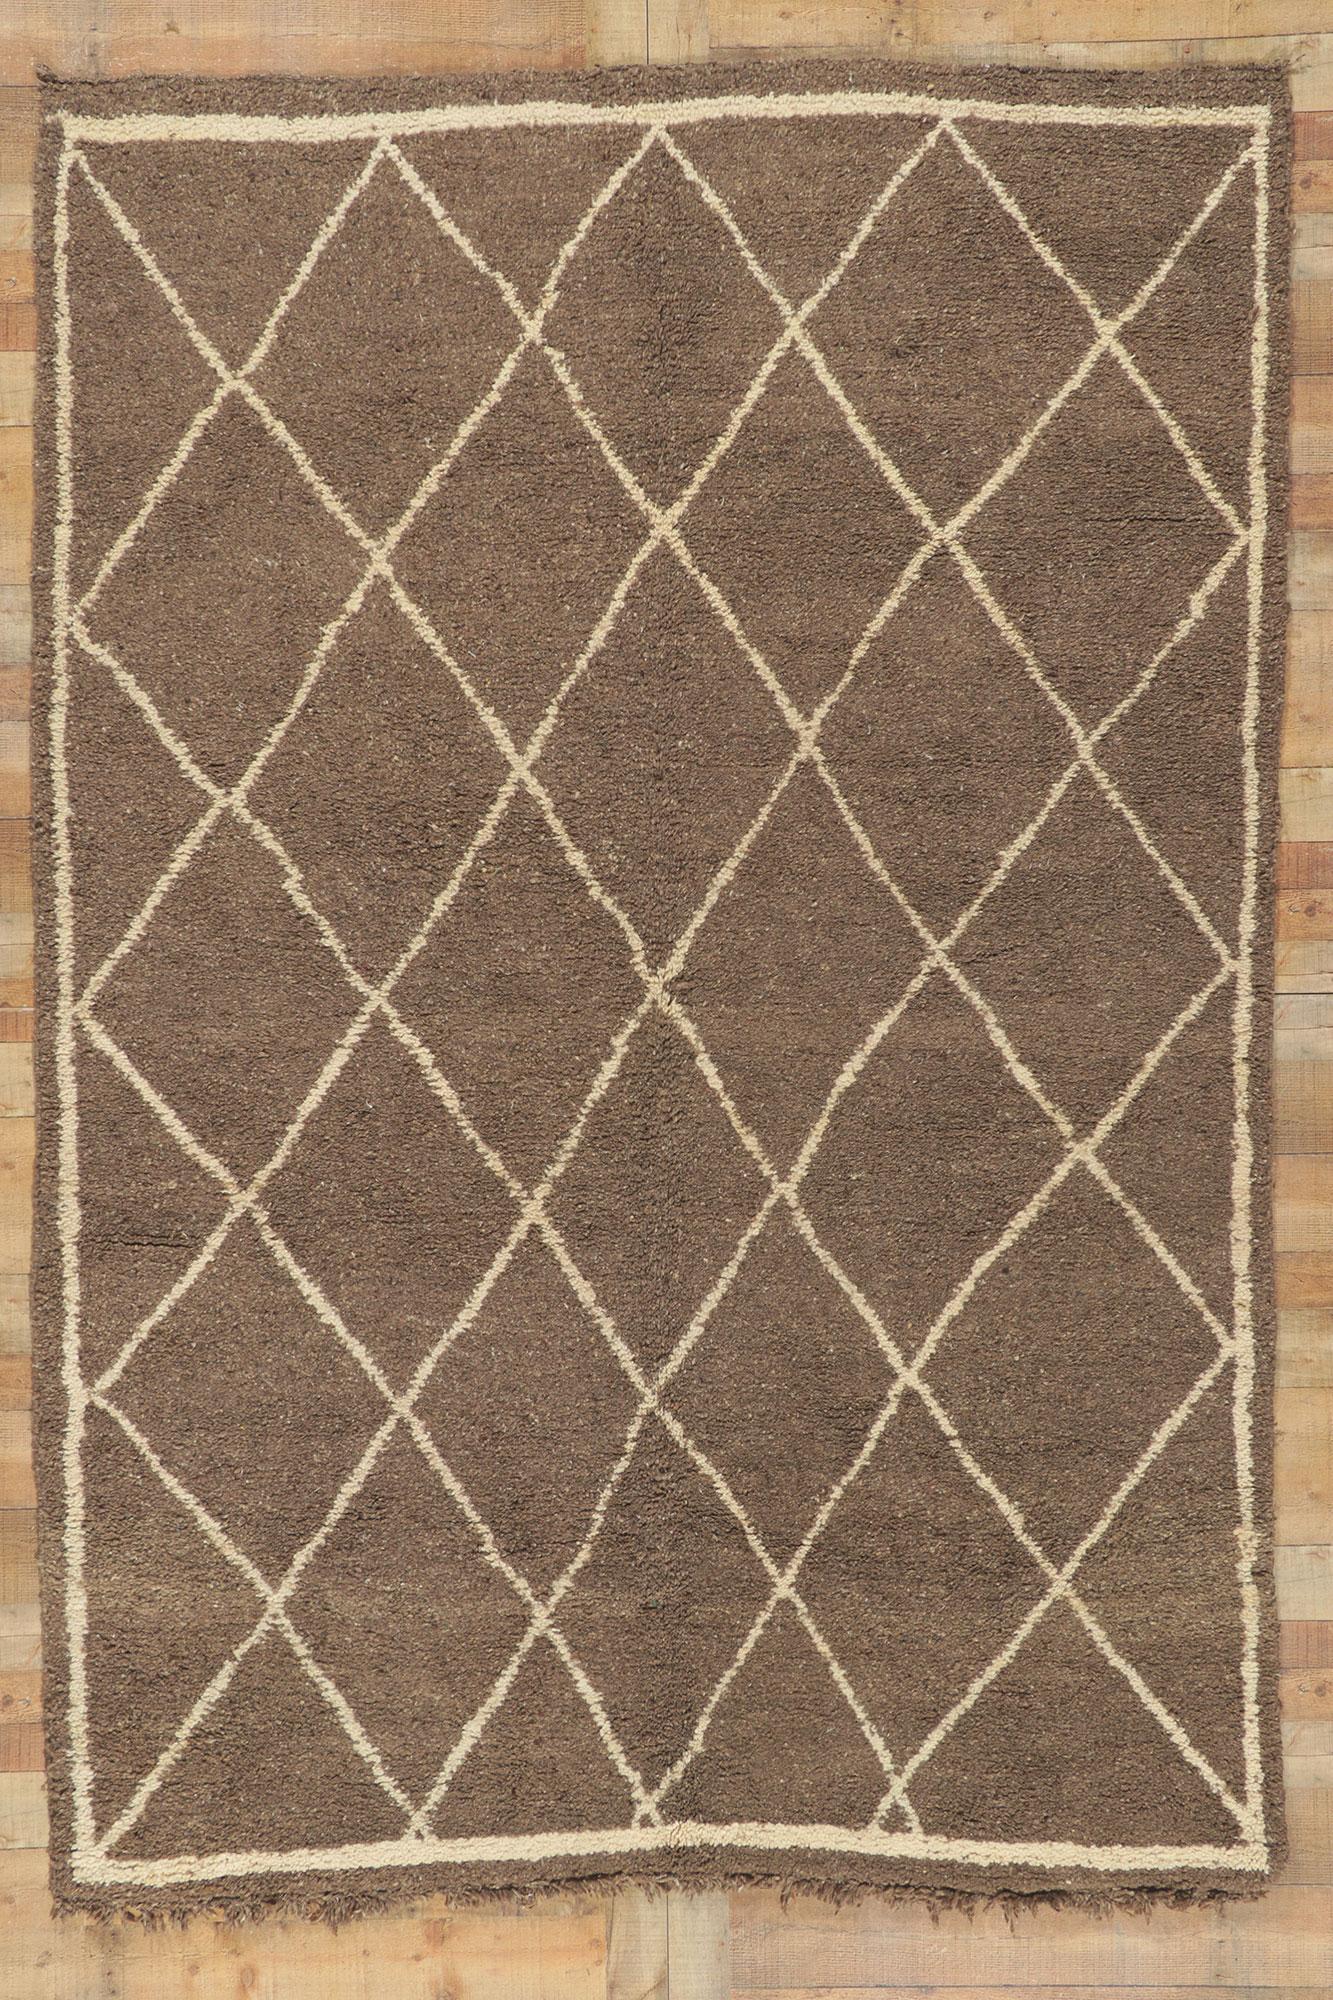 Vintage Brown Moroccan Beni Ourain Rug In Good Condition For Sale In Dallas, TX